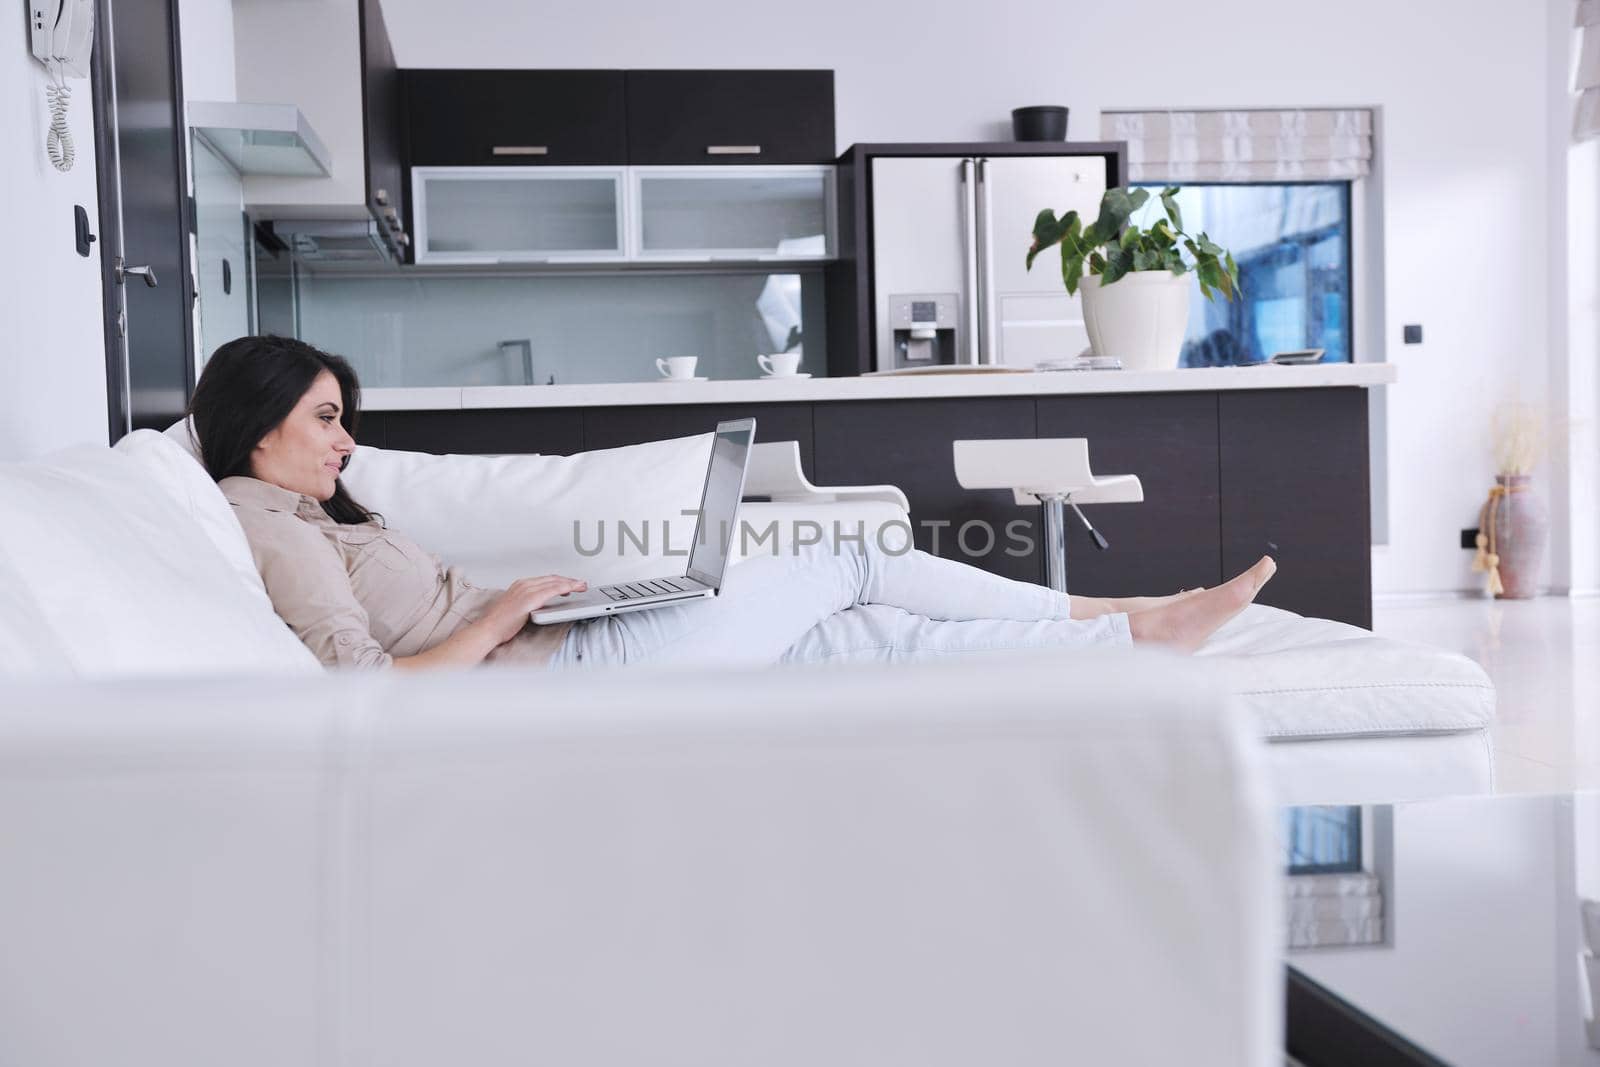 relaxed young woman working on laptop computer in bright  home indoor